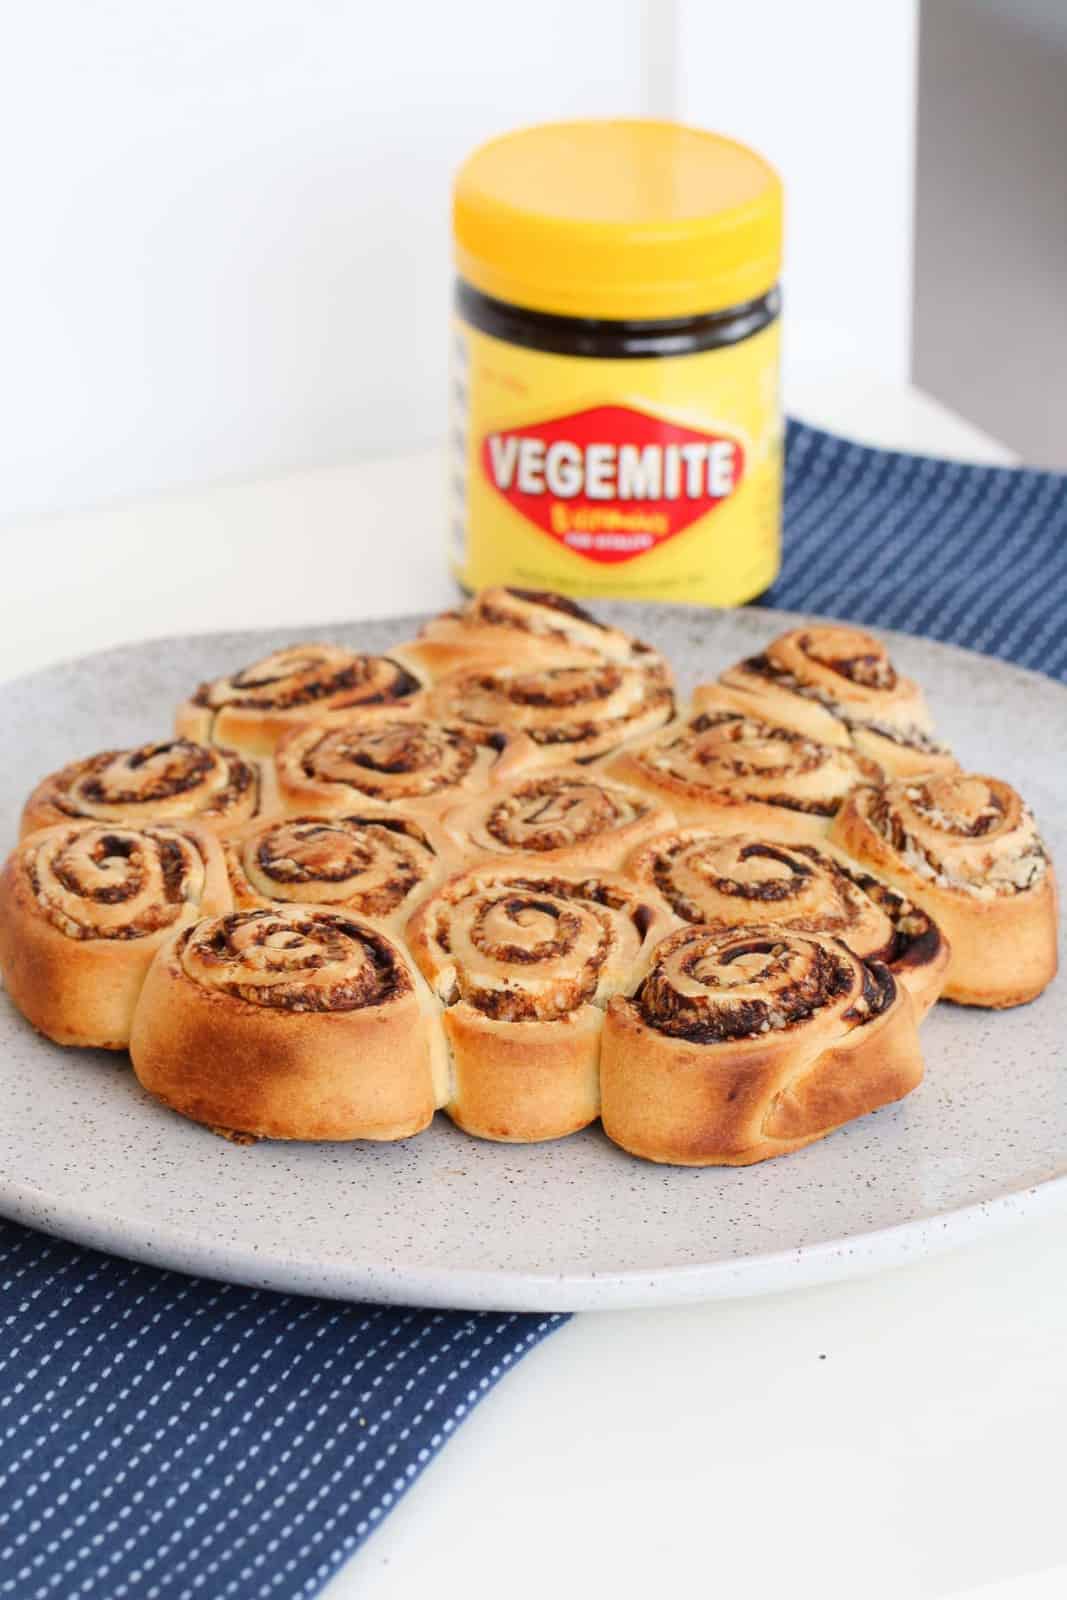 A batch of baked scrolls on a speckled plate on a blue and white tea towel, with a jar of Vegemite in the background.